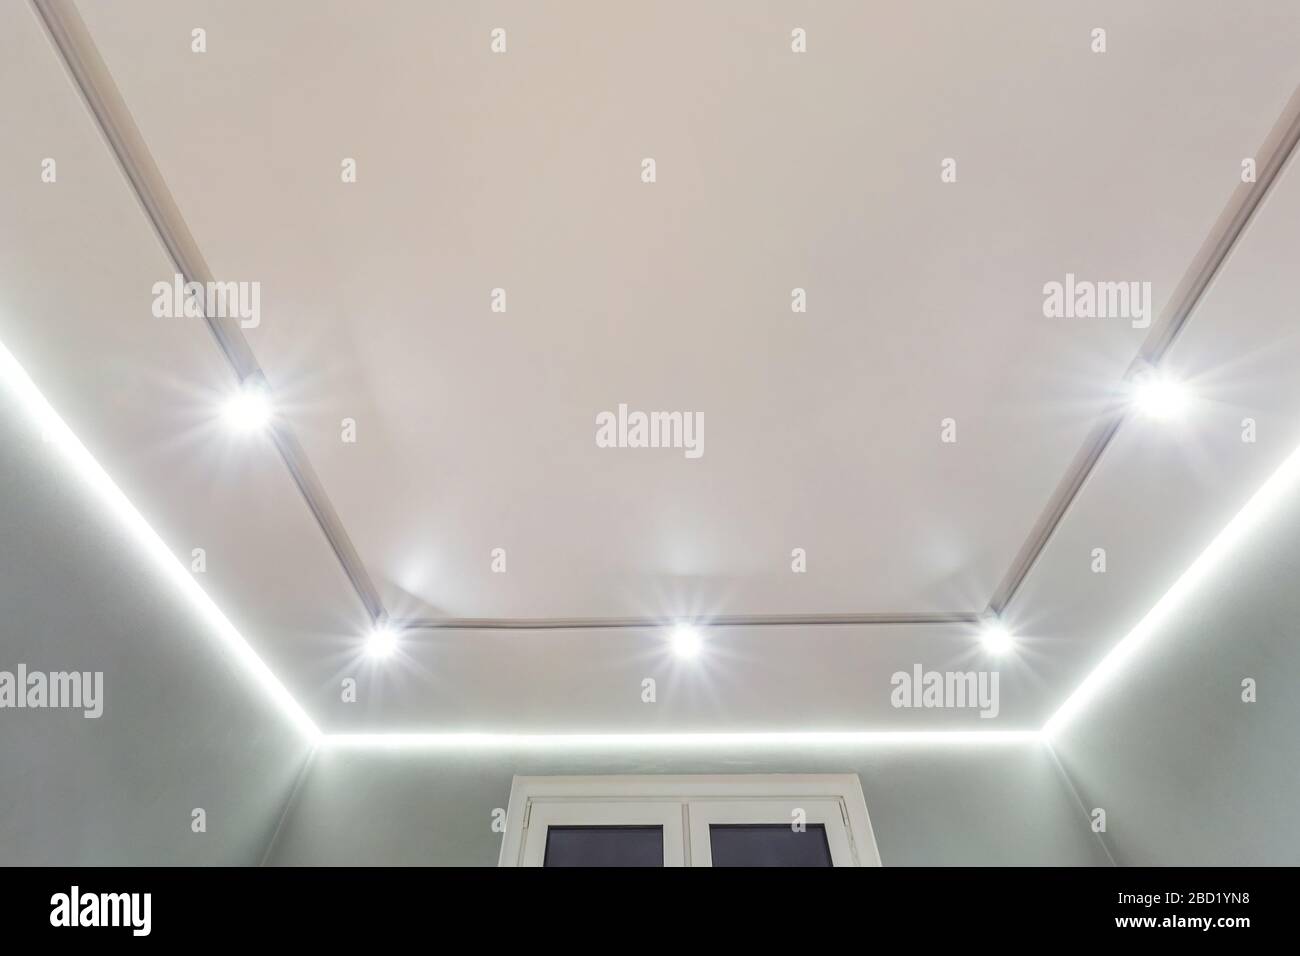 suspended ceiling with halogen spots lamps and drywall construction in  empty room in apartment or house. Stretch ceiling white and complex shape  Stock Photo - Alamy